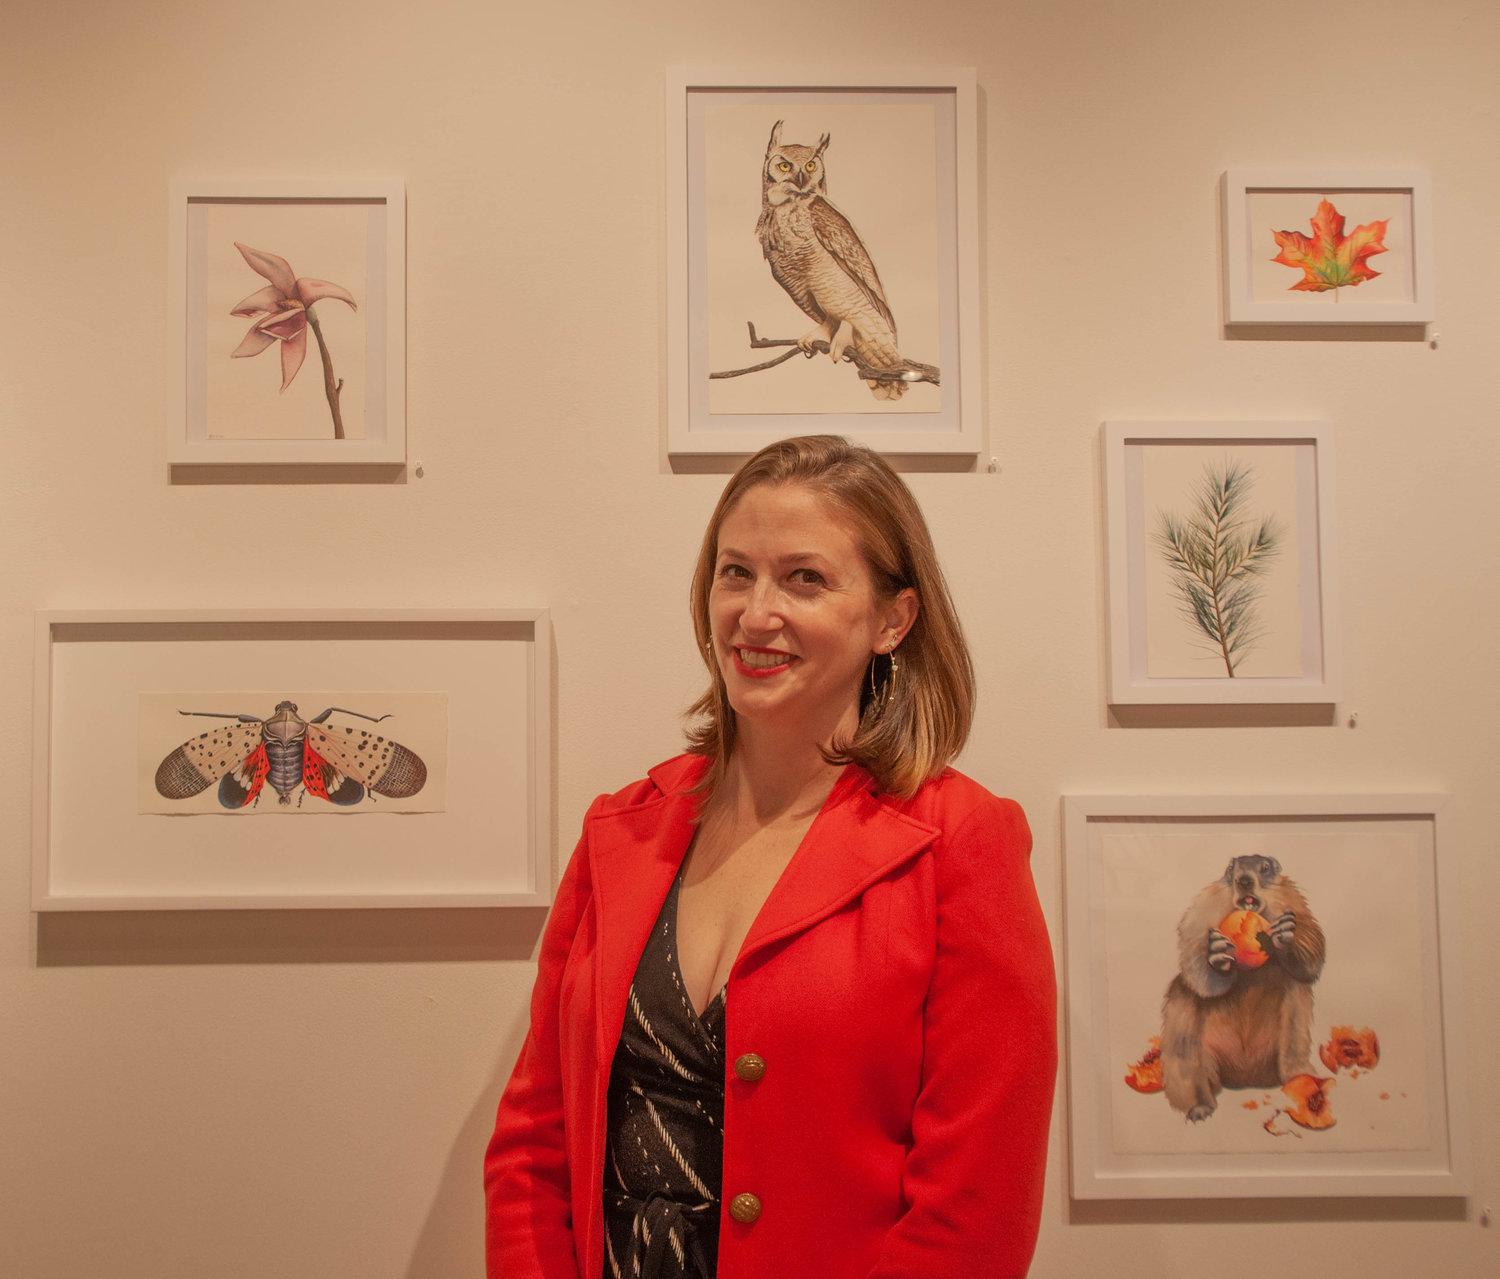 “We don’t always get to choose our neighbors,” artist Allison Maletz said. “We try our best to adapt to them. We label species as invasive and non-native, but isn’t that what we are to them?”..